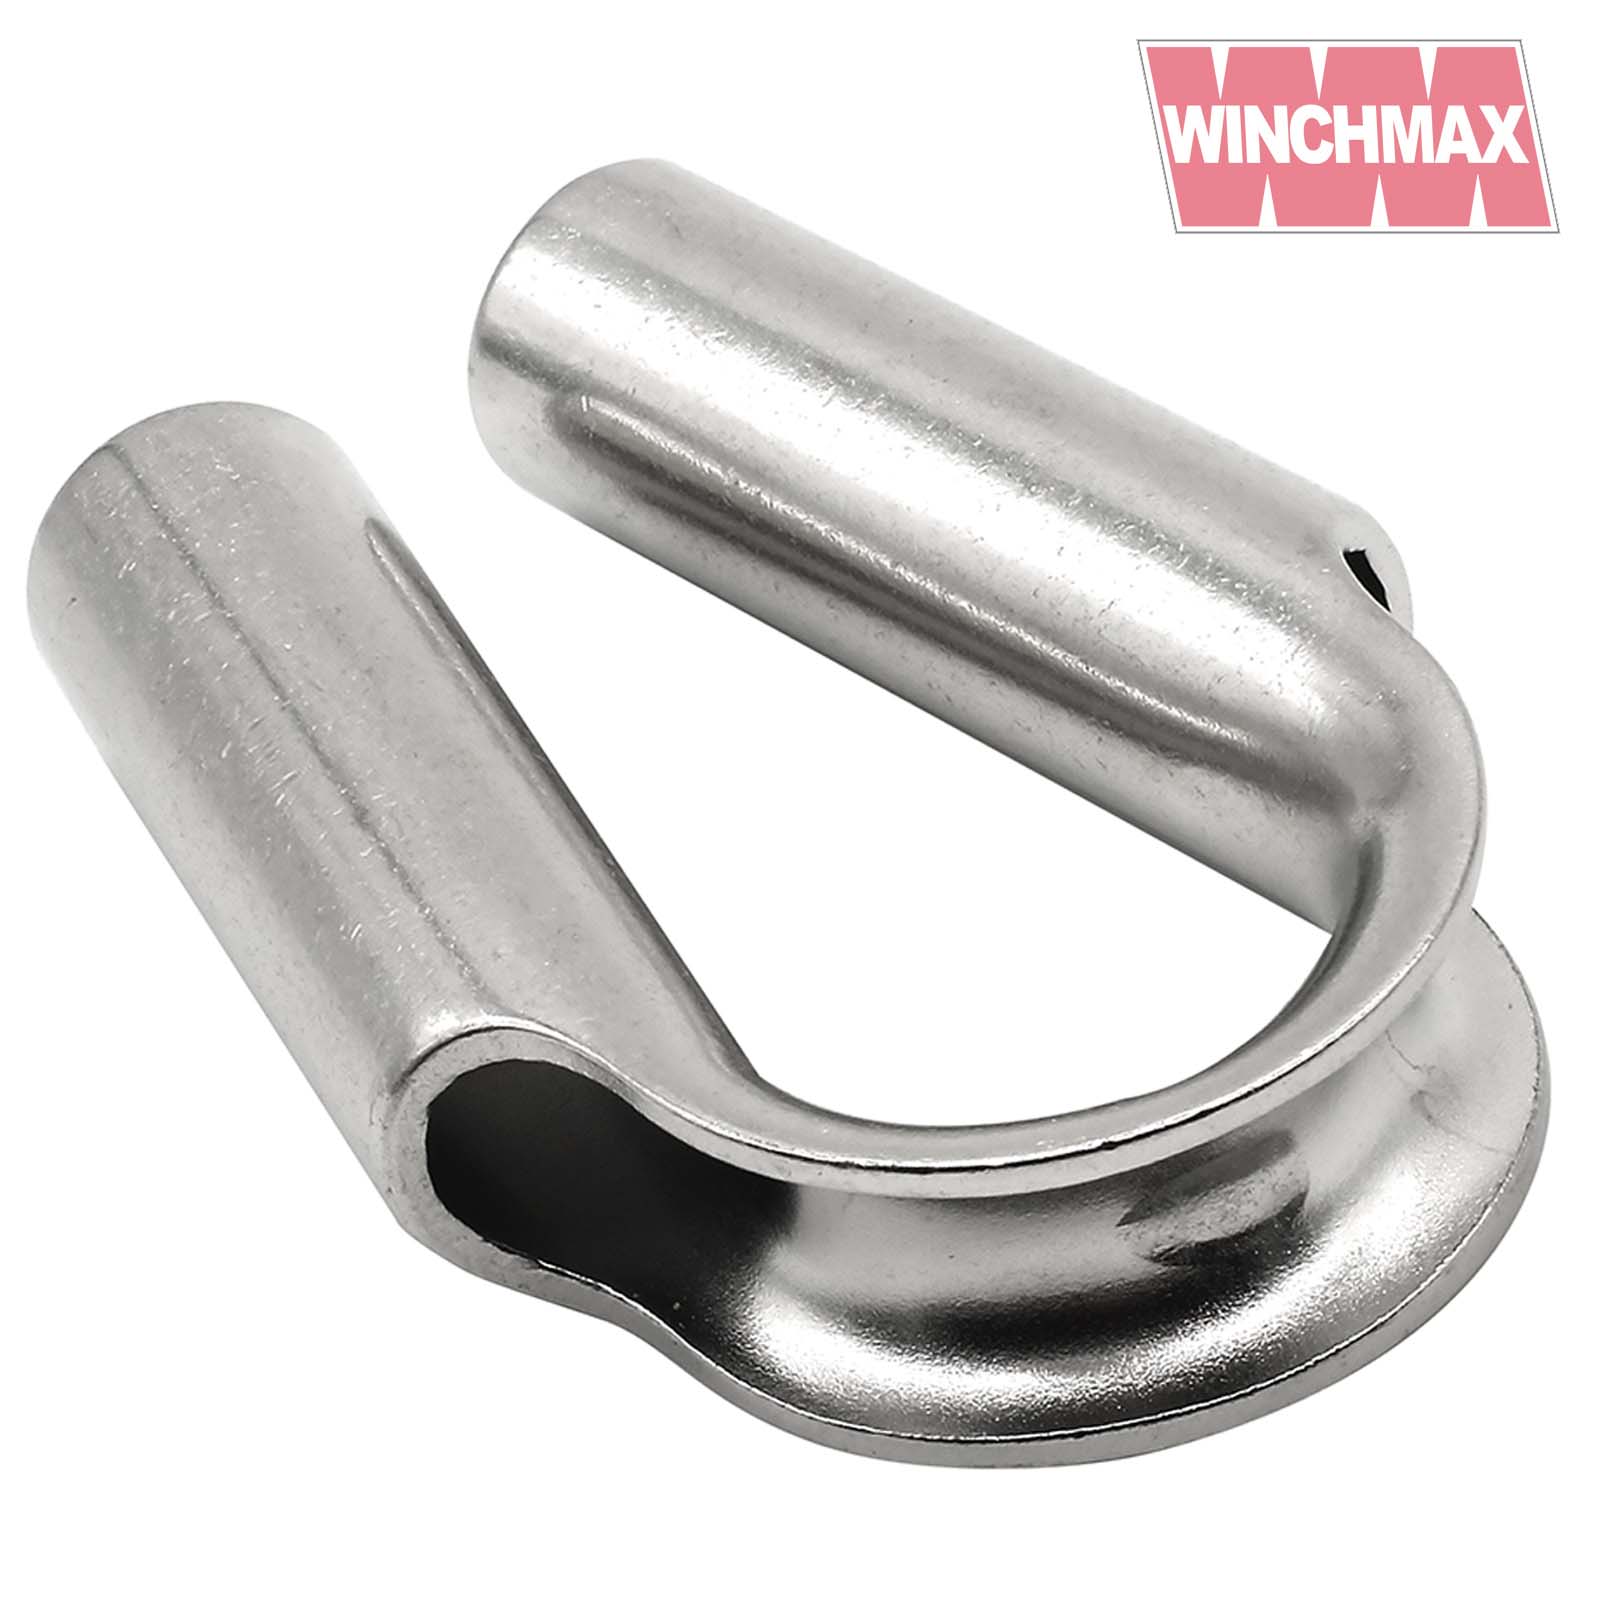 Winchmax Rope Thimble